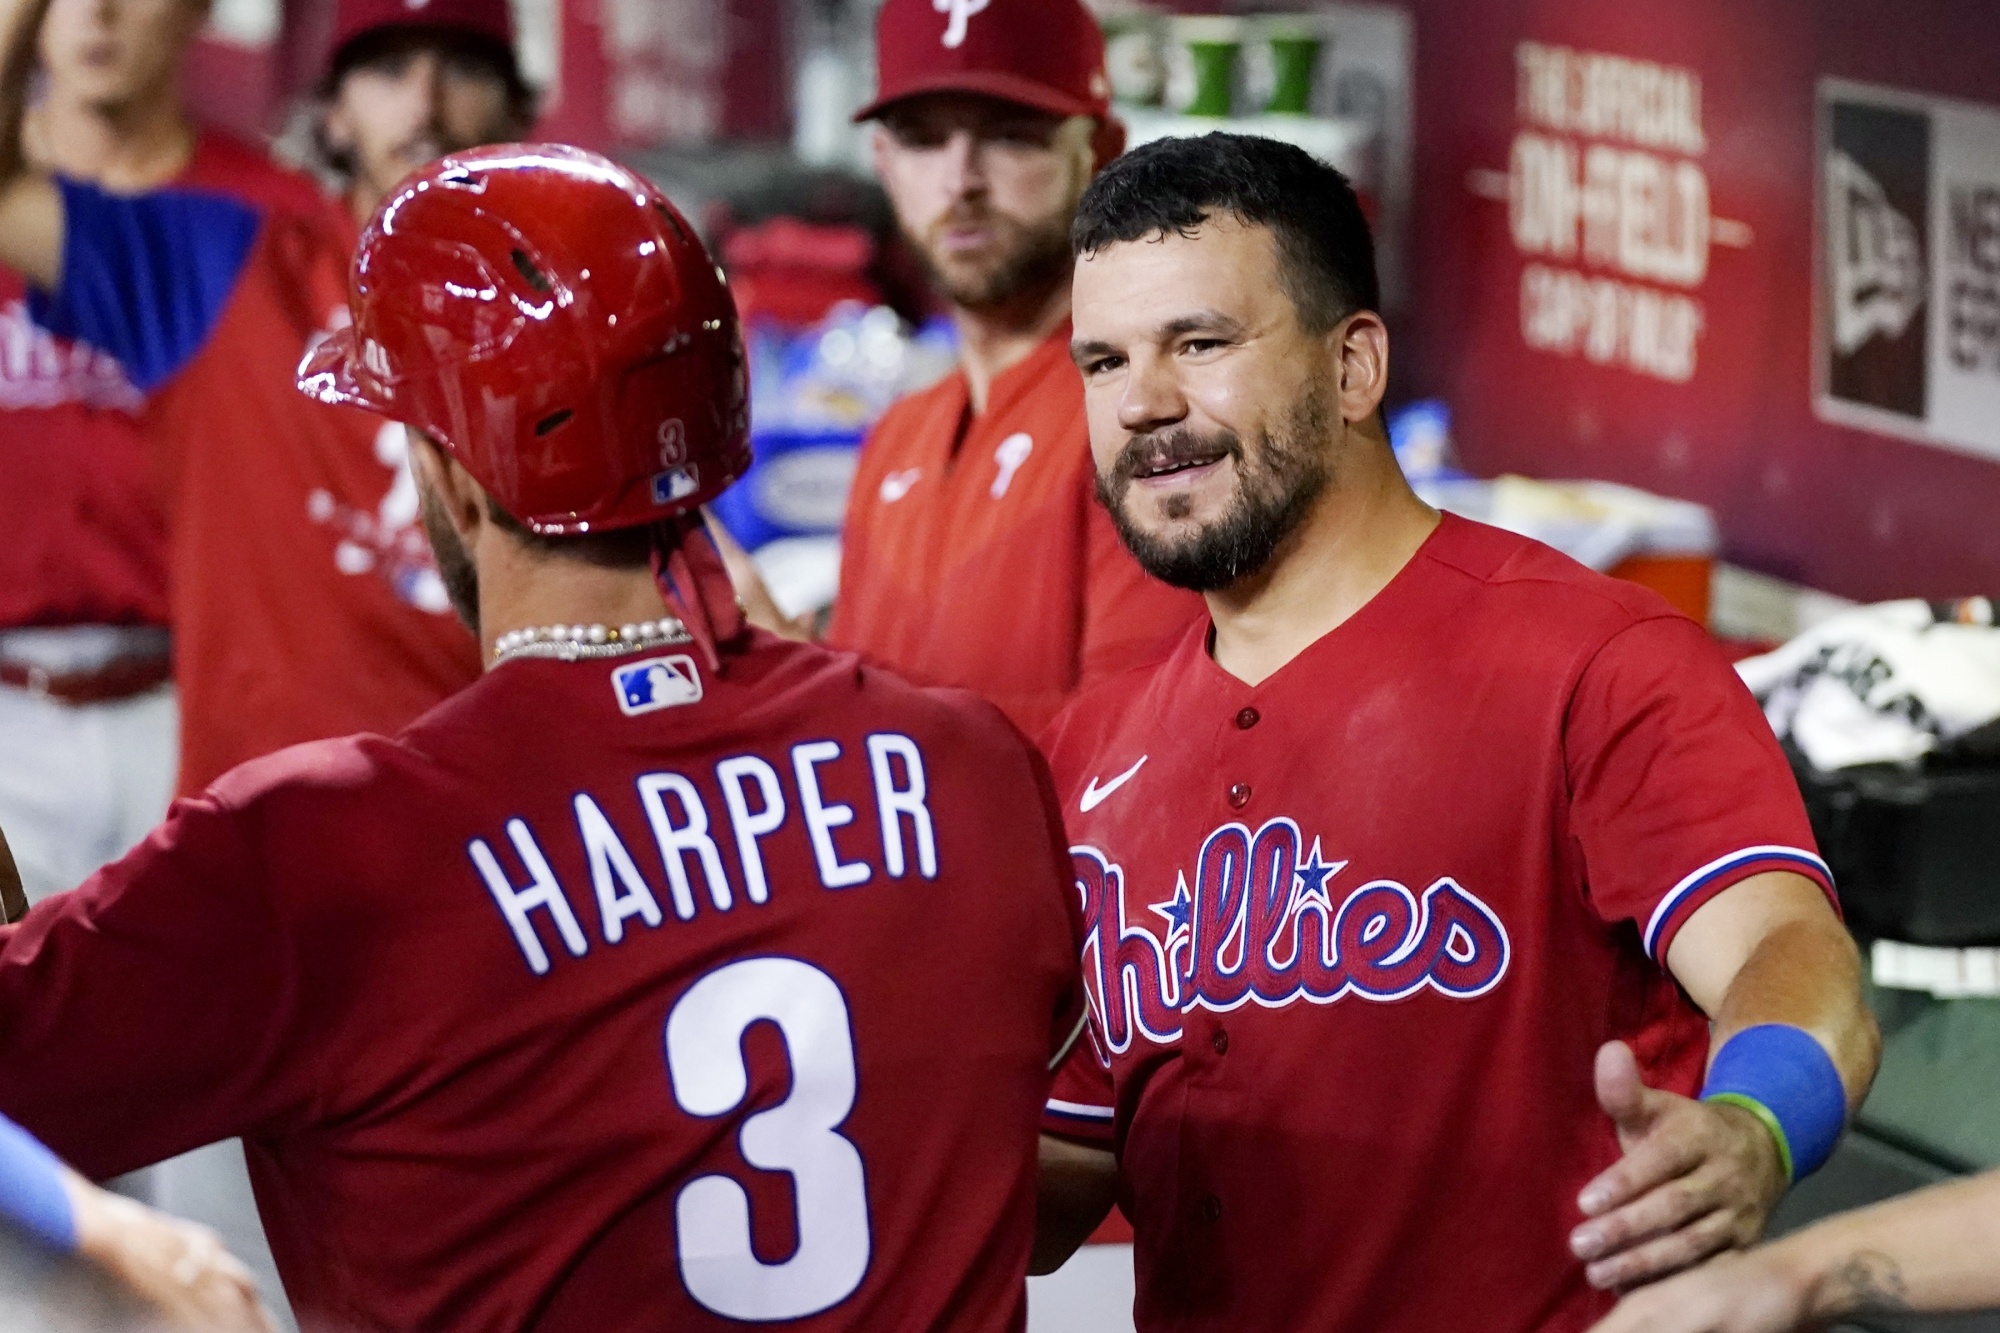 Phillies beat D-backs 6-1 for 3-2 NLCS lead